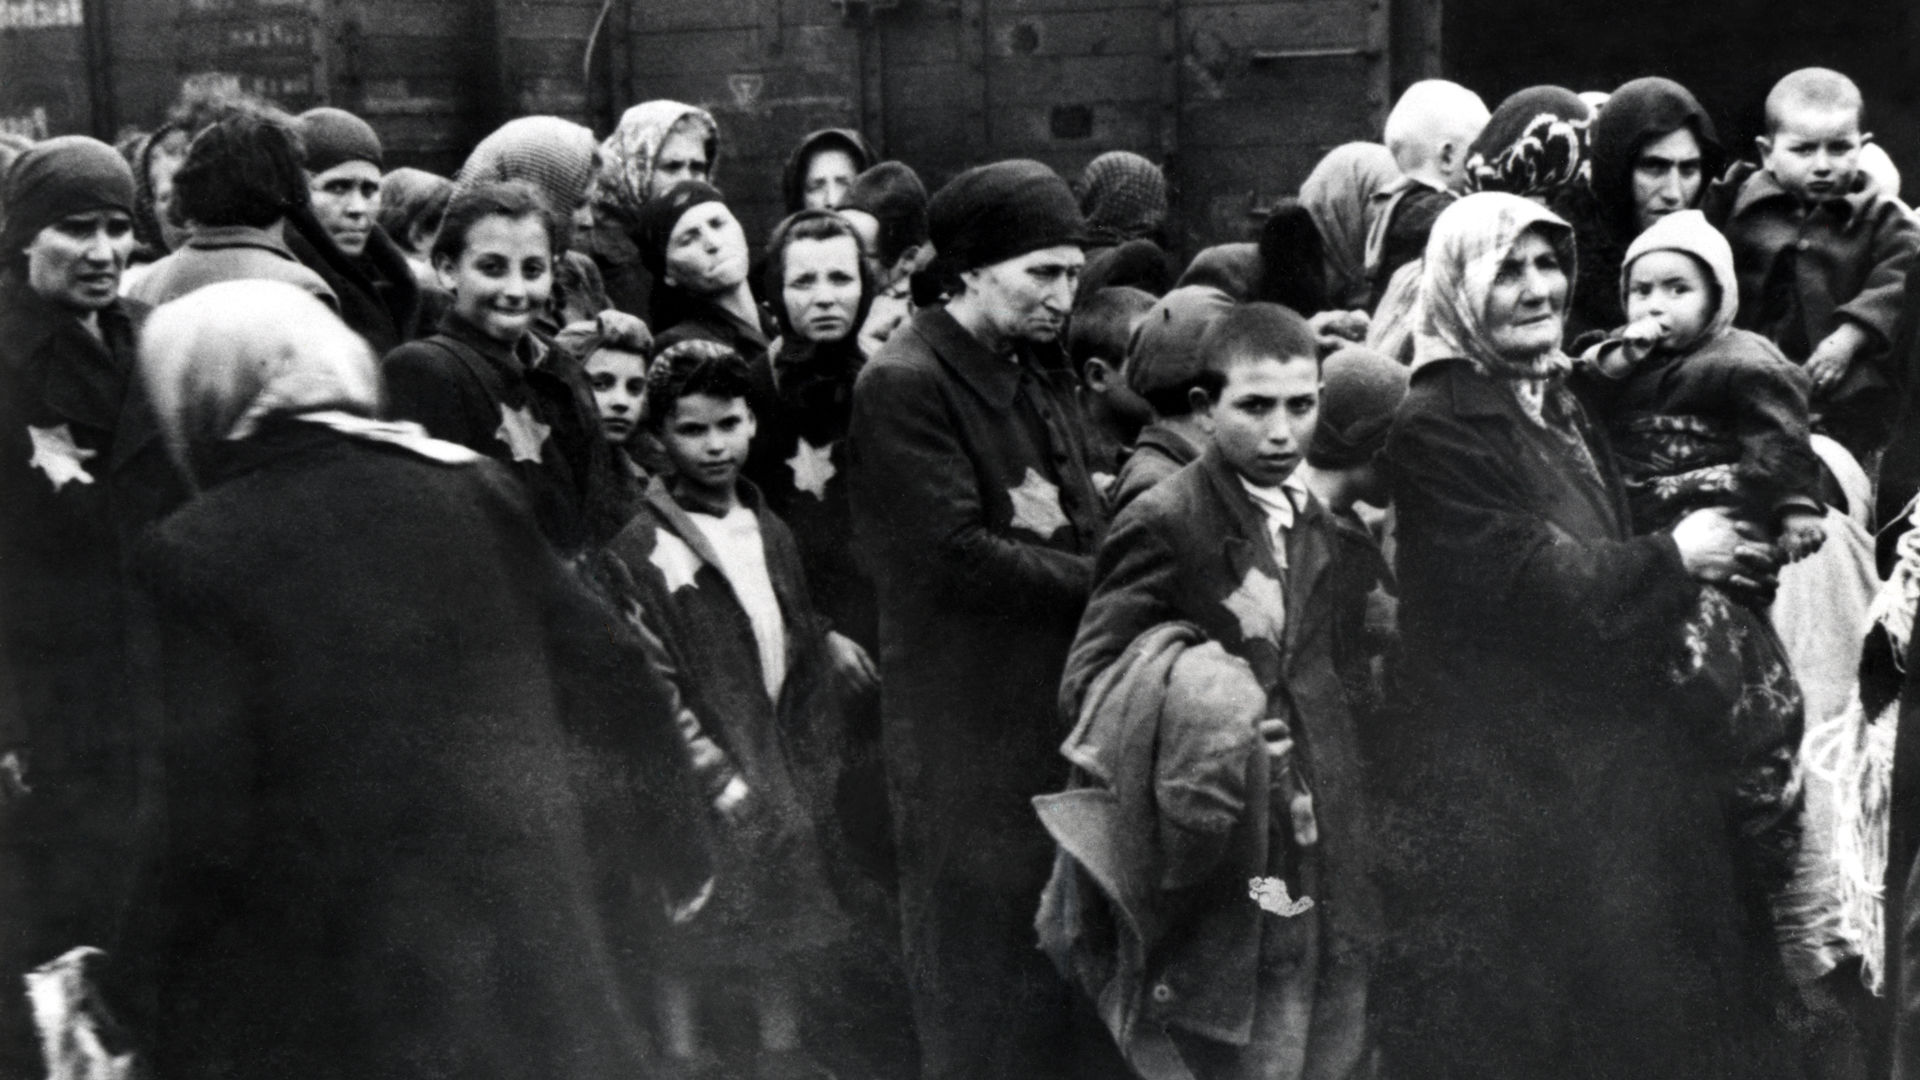 Horrors of Auschwitz: The Numbers Behind WWII's Deadliest Concentration Camp